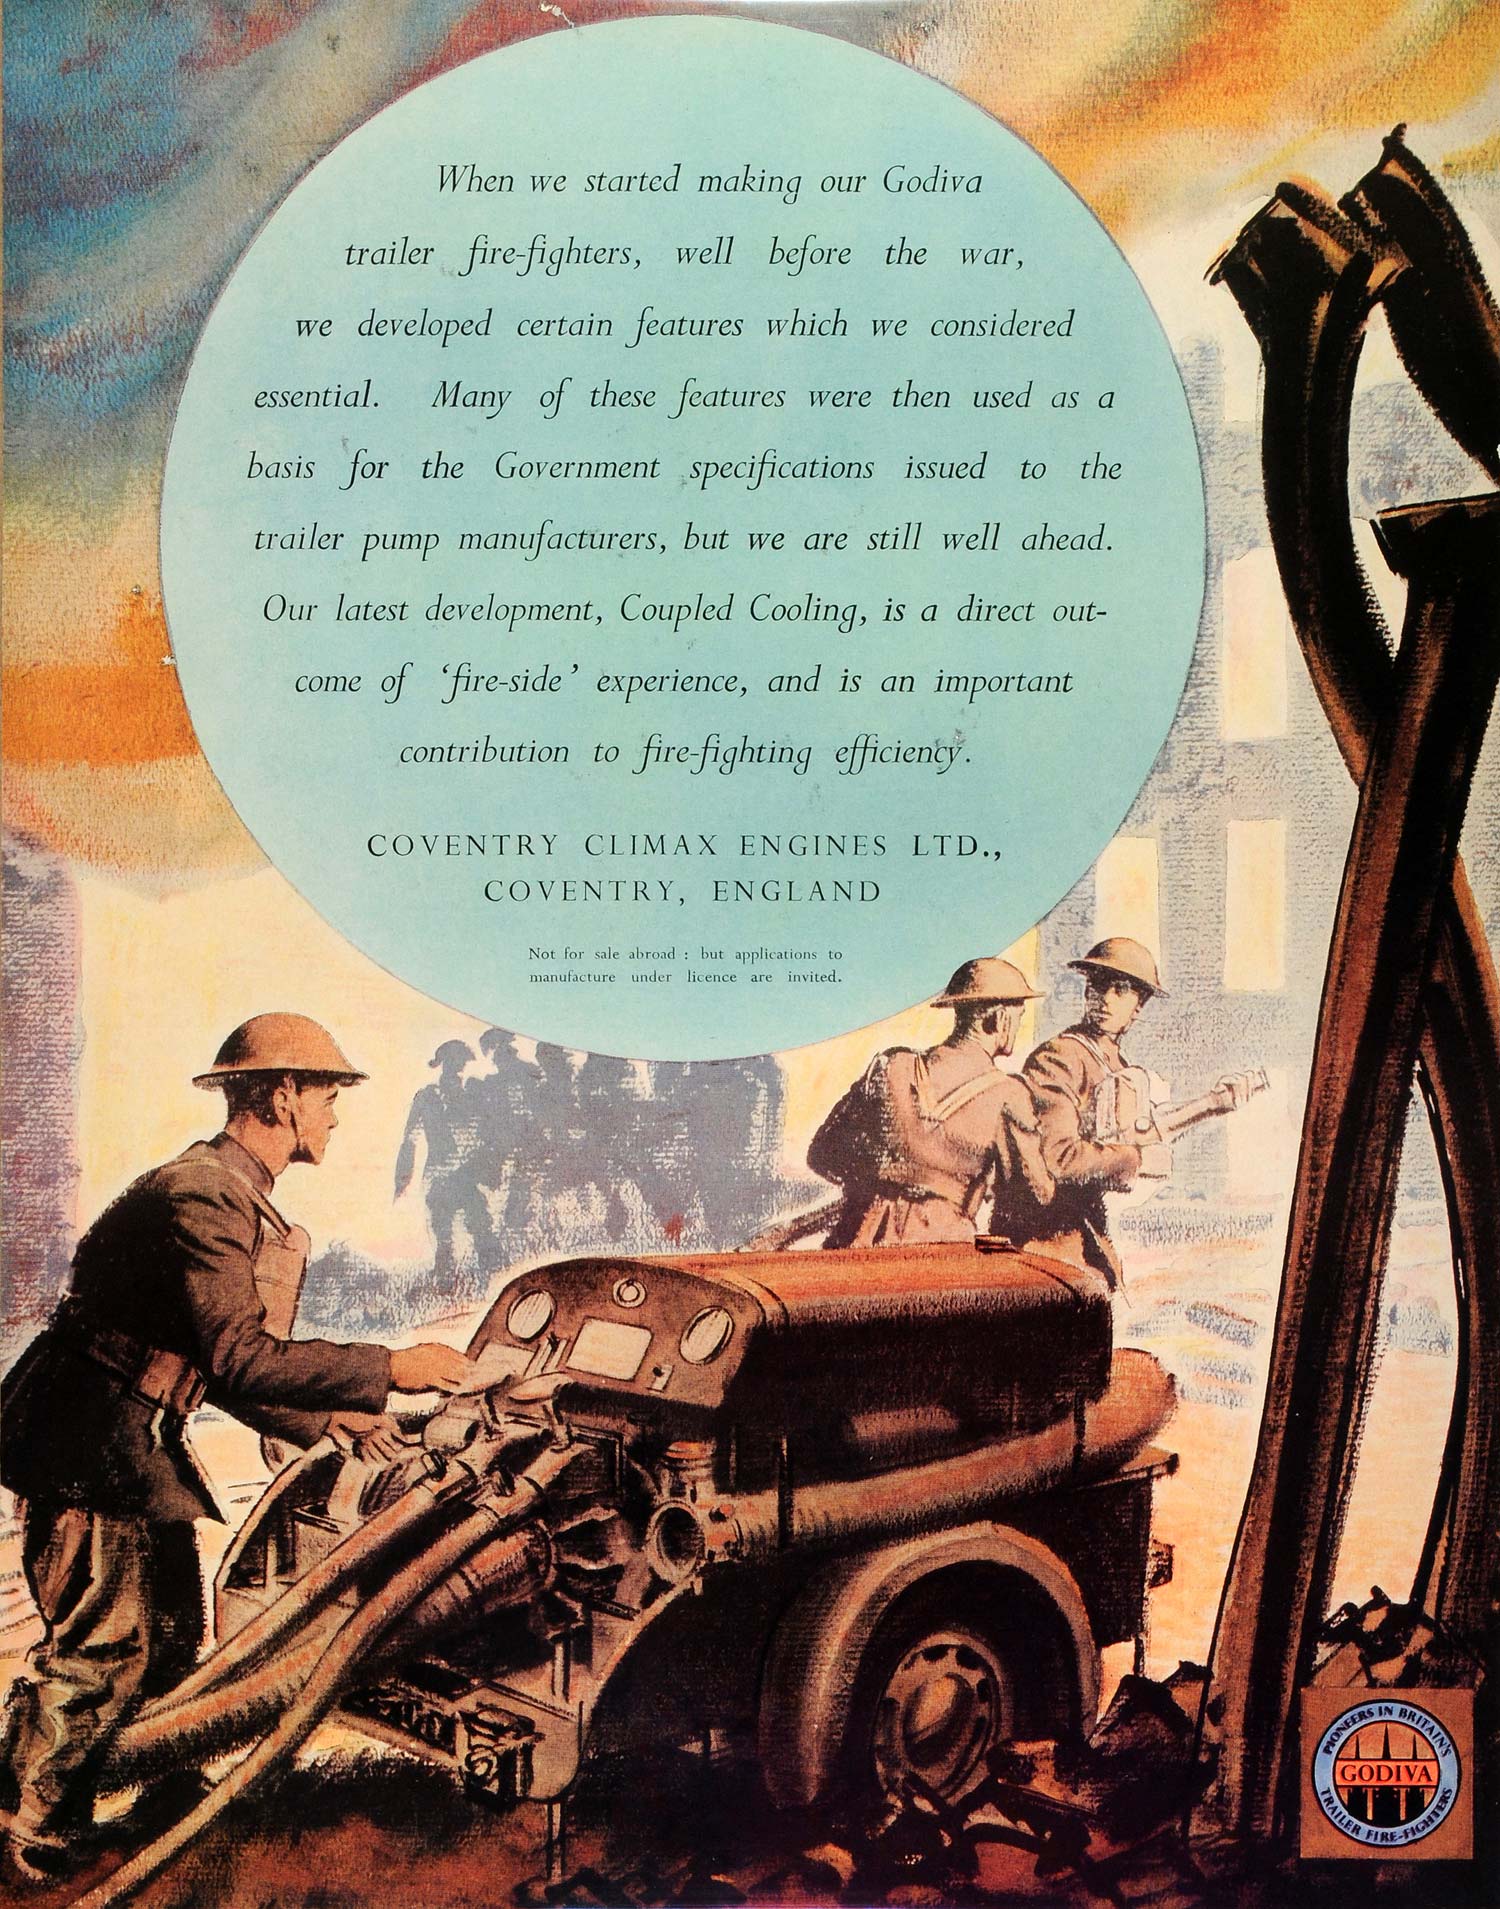 1942 Ad Coventry Climax Engines WWII Godiva Britain War Production FZ4